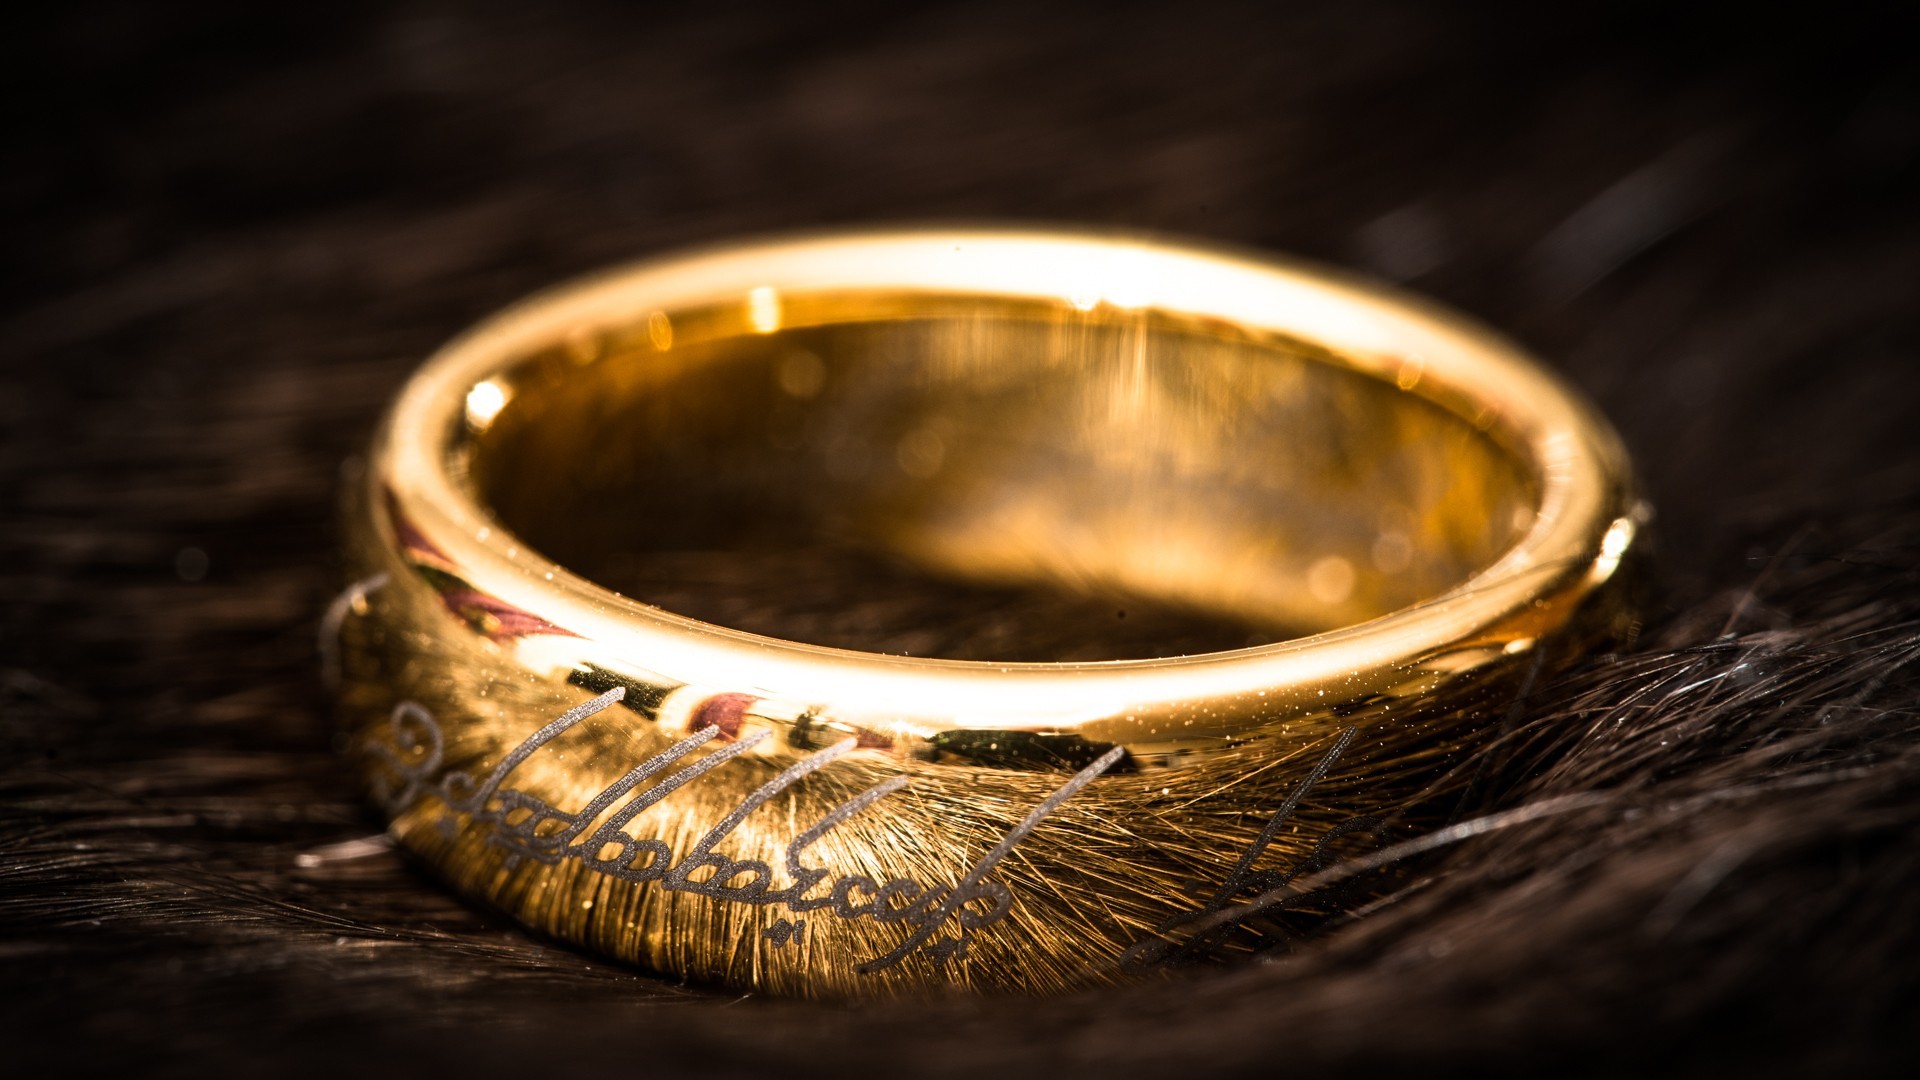 The Lord Of The Rings Rings Depth Of Field The One Ring Macro 1920x1080